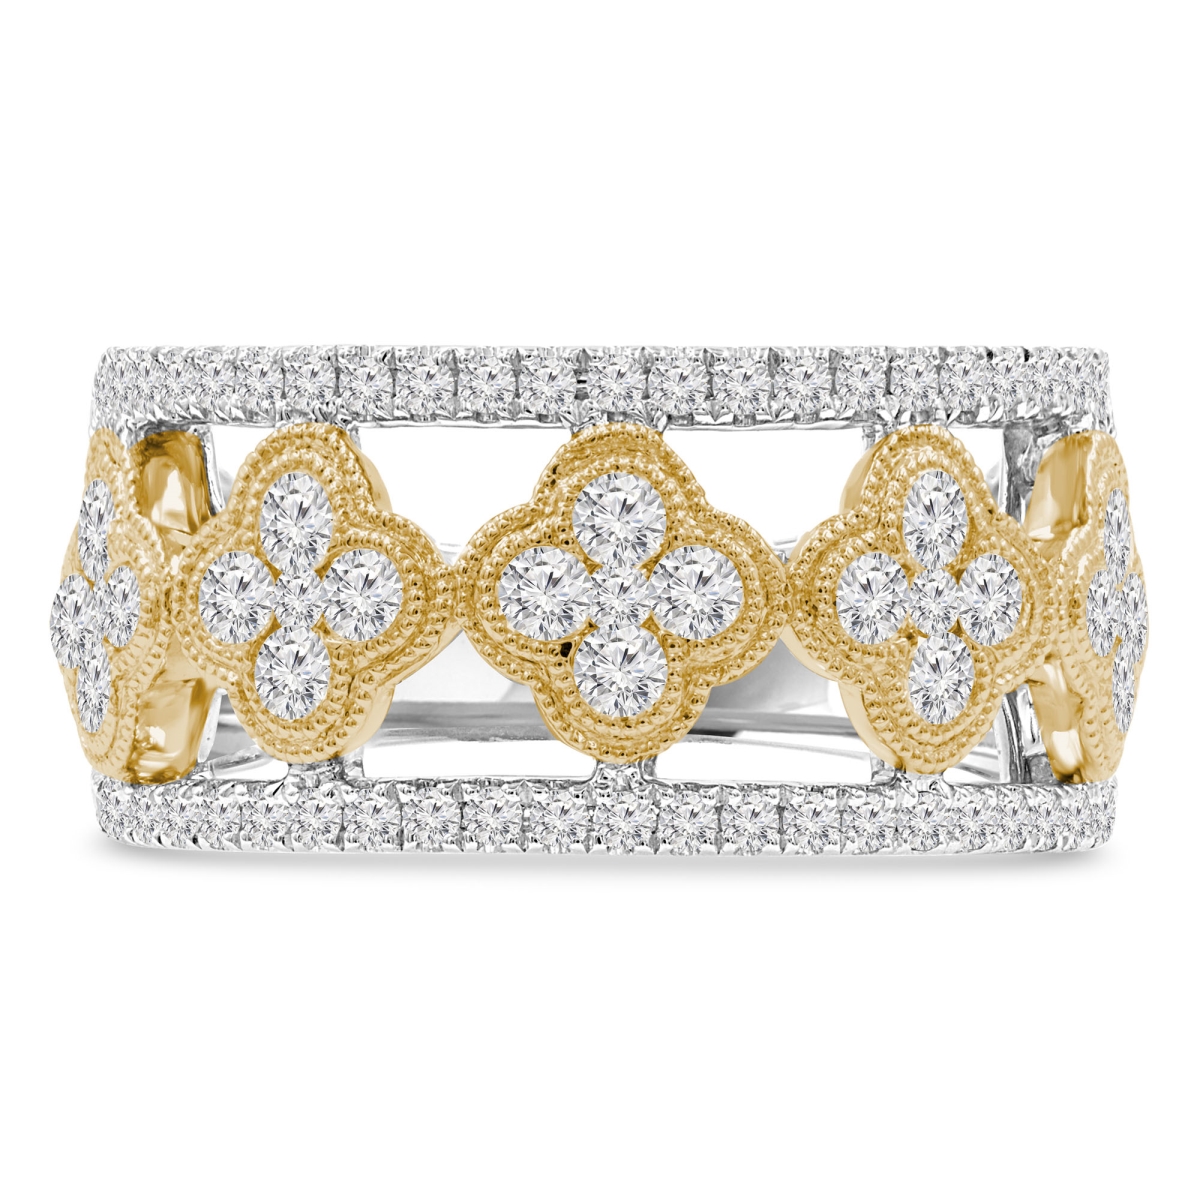 Picture of Majesty Diamonds MDR210140-6.5 1 CTW Round Diamond Cocktail Ring in 14K Two-Tone Gold - Size 6.5